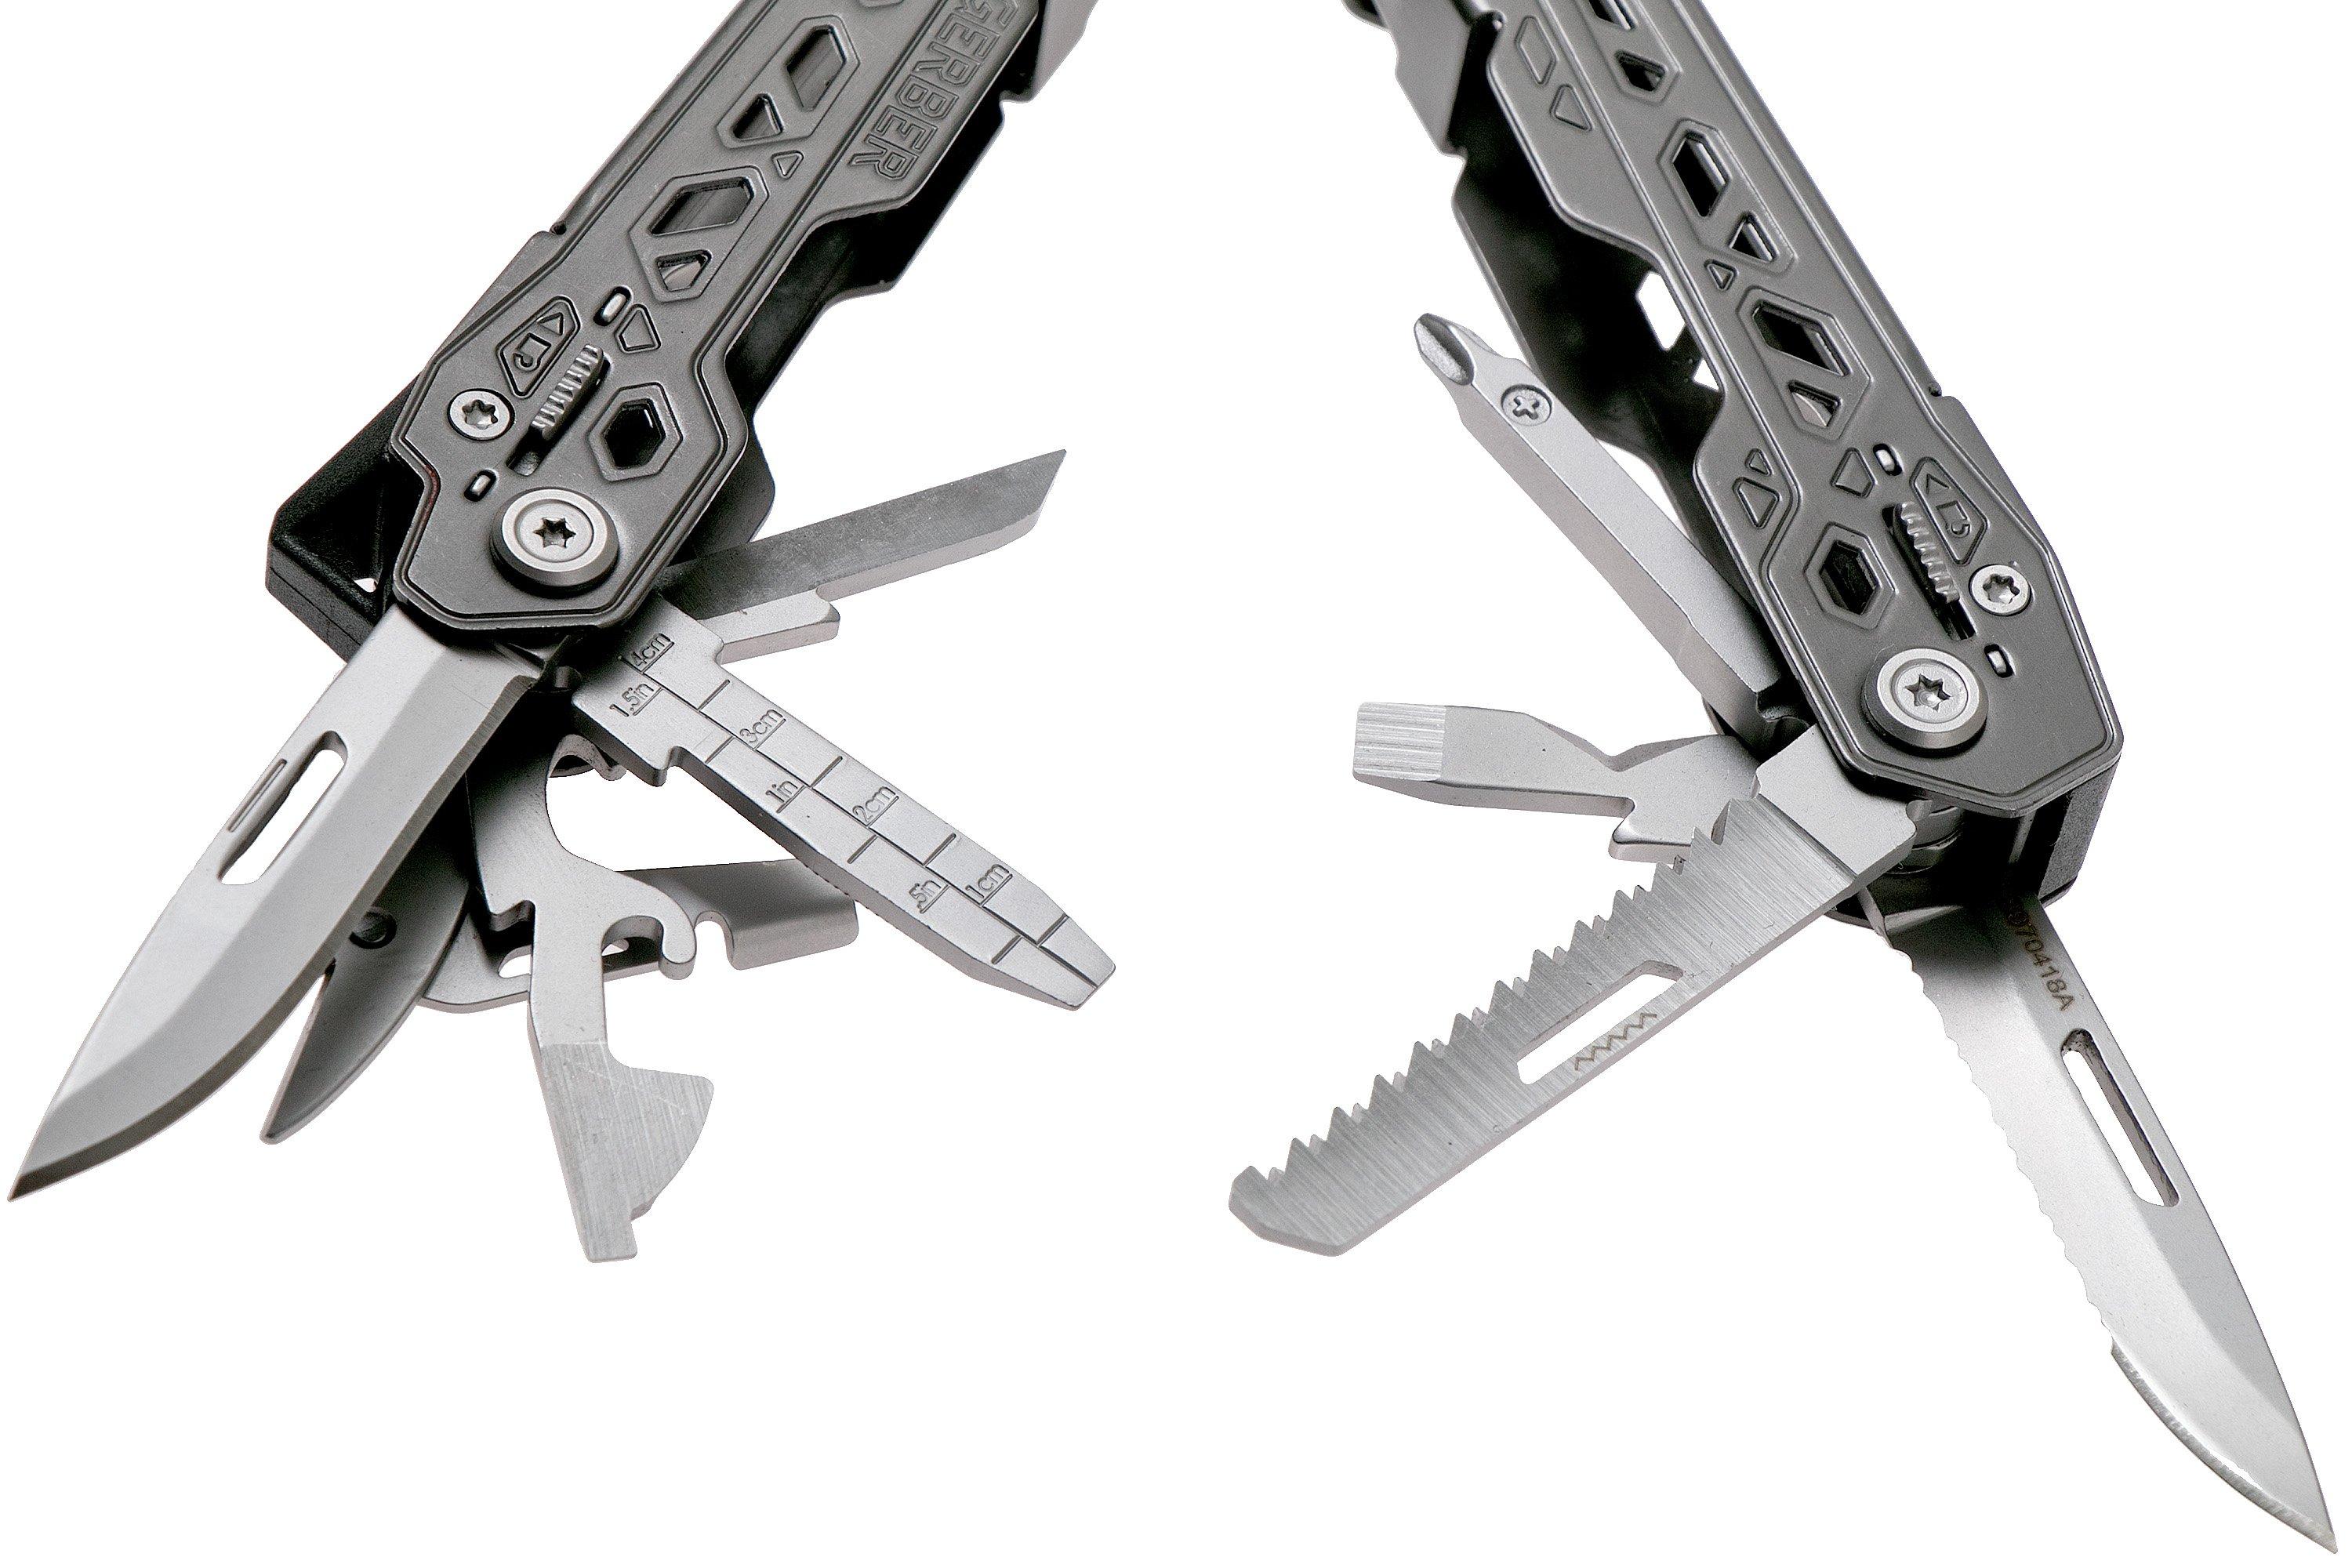 Gerber Truss multi-tool, GE31-003304 | Advantageously shopping at ...